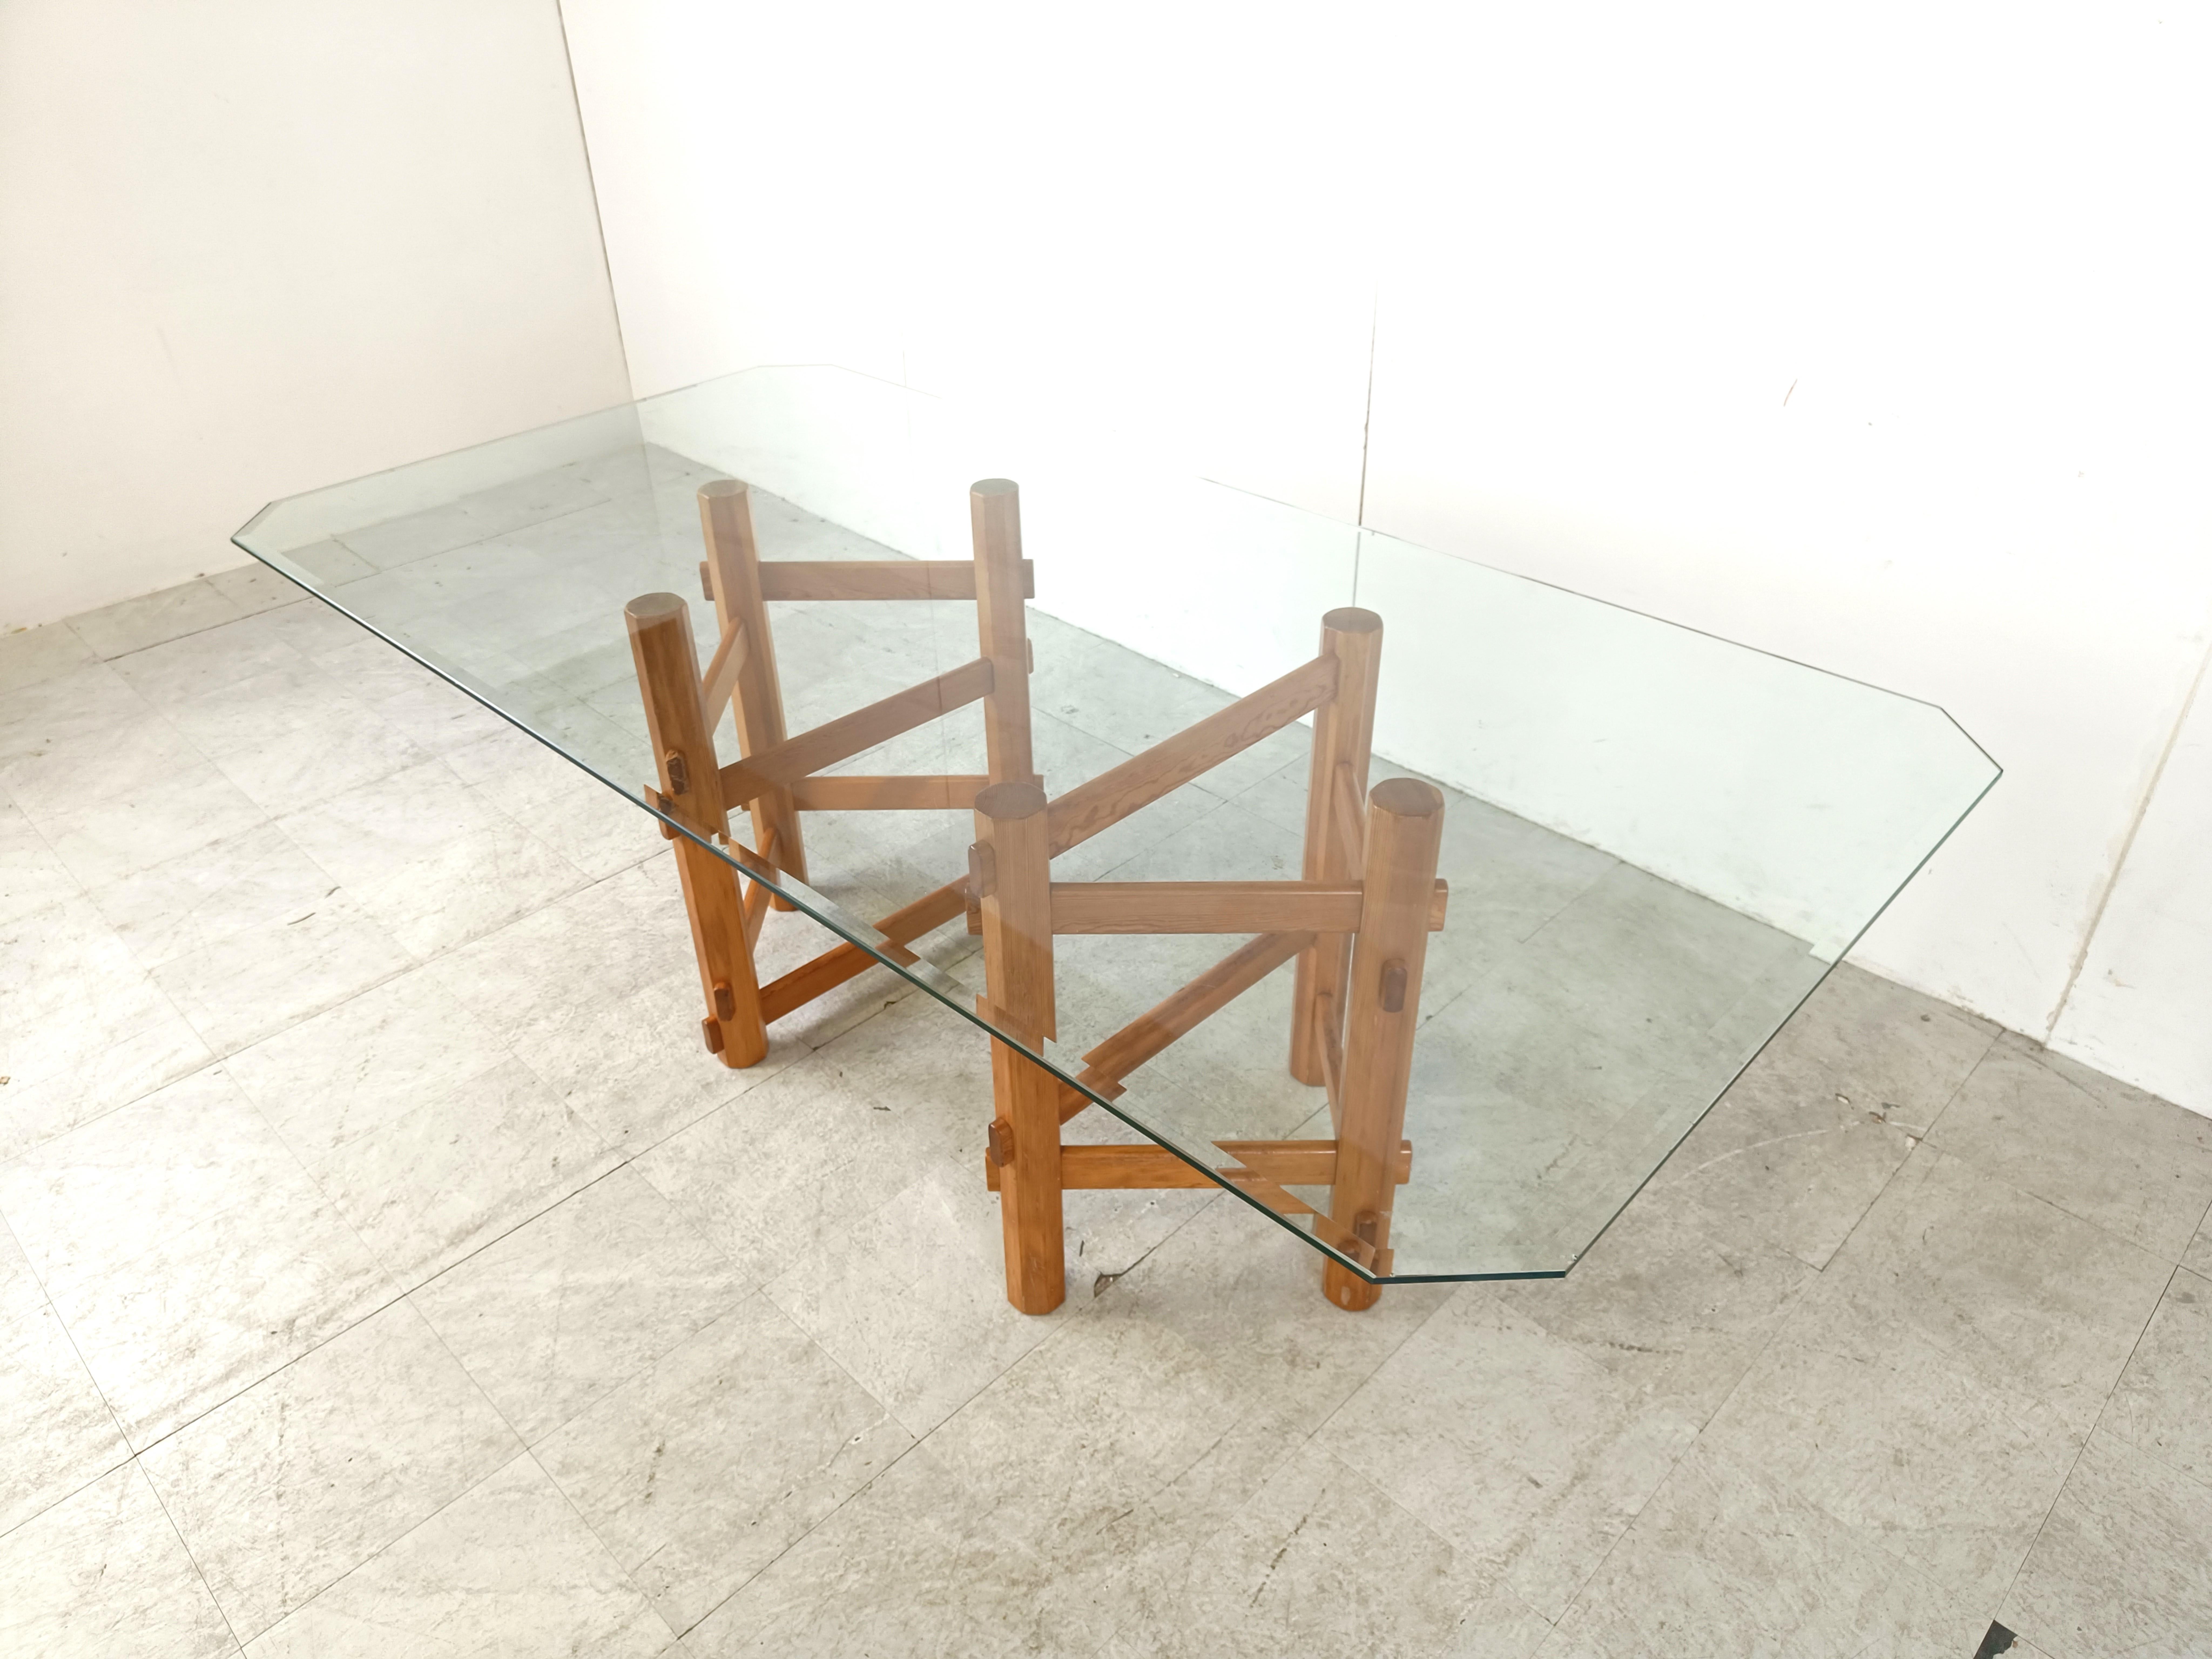 Elegant vintage dining table consisting out of a glass beveled table top and two wooden bases with interlocking structures.

Timeless design.

1980s - Belgium

The wooden bases have some wear as pictured but still look great

Dimensions:
Height: